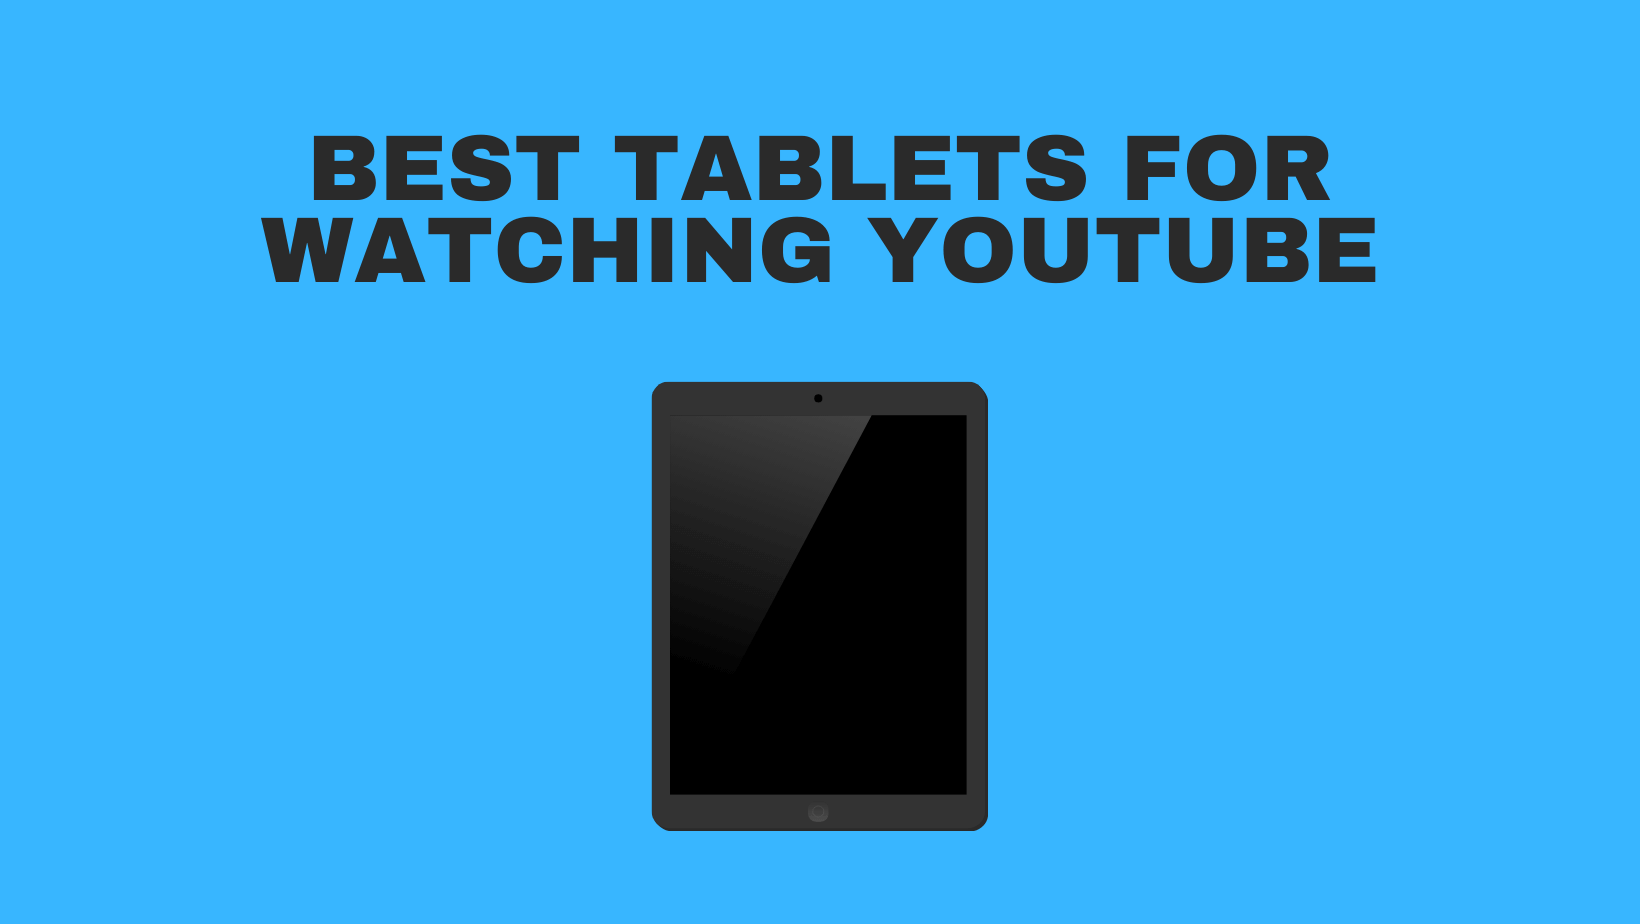 Best Tablets For Watching YouTube